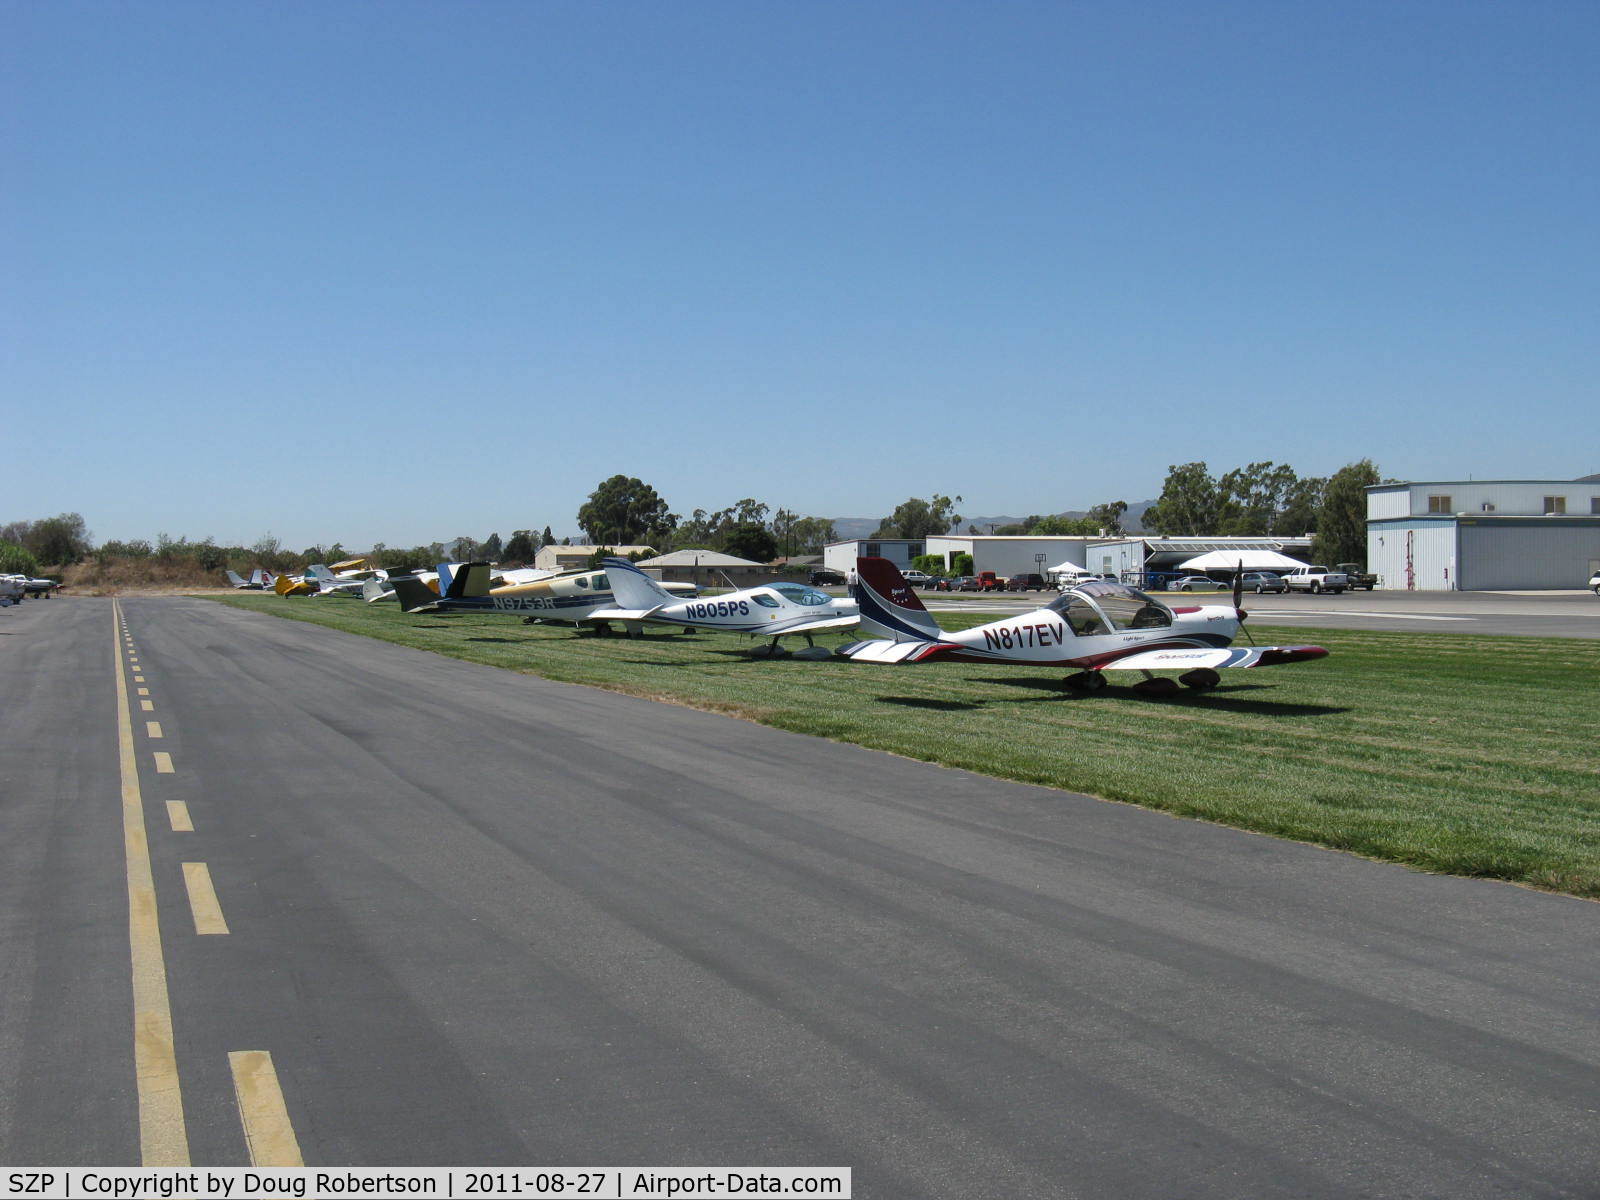 Santa Paula Airport (SZP) - James 'Seamus' McCaughley, Jr. Memorial-some of the fly-in aircraft parked on 22L grass